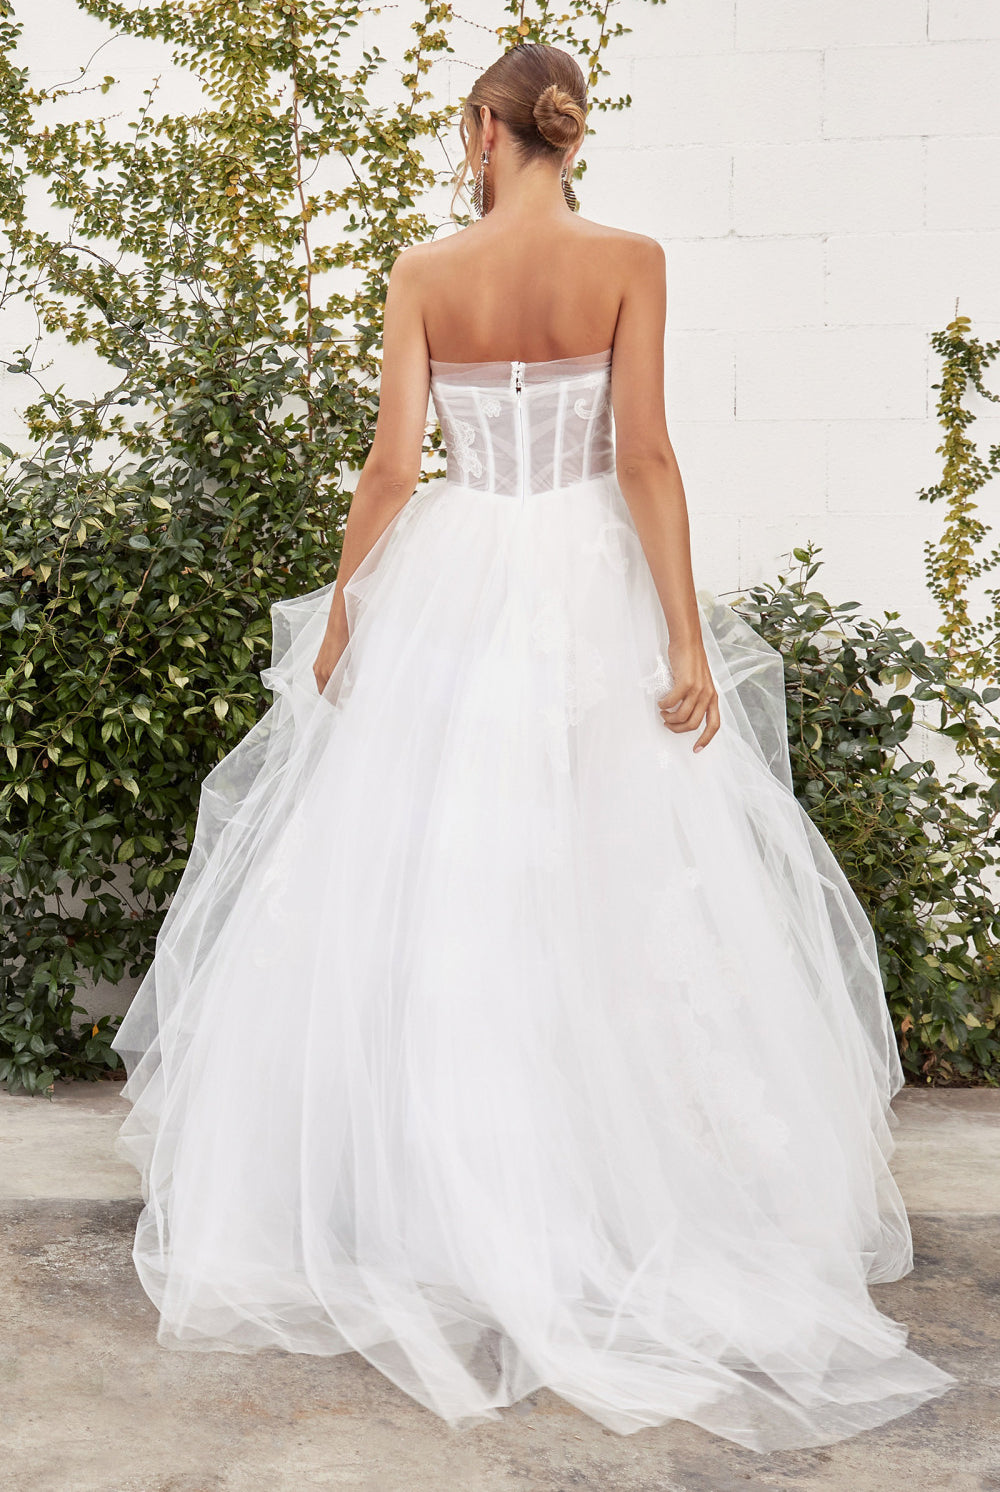 Stunning Aurora Tulle Gown for Modern Brides with Vintage Appliqués and Sheer Zipped Corset-smcdress